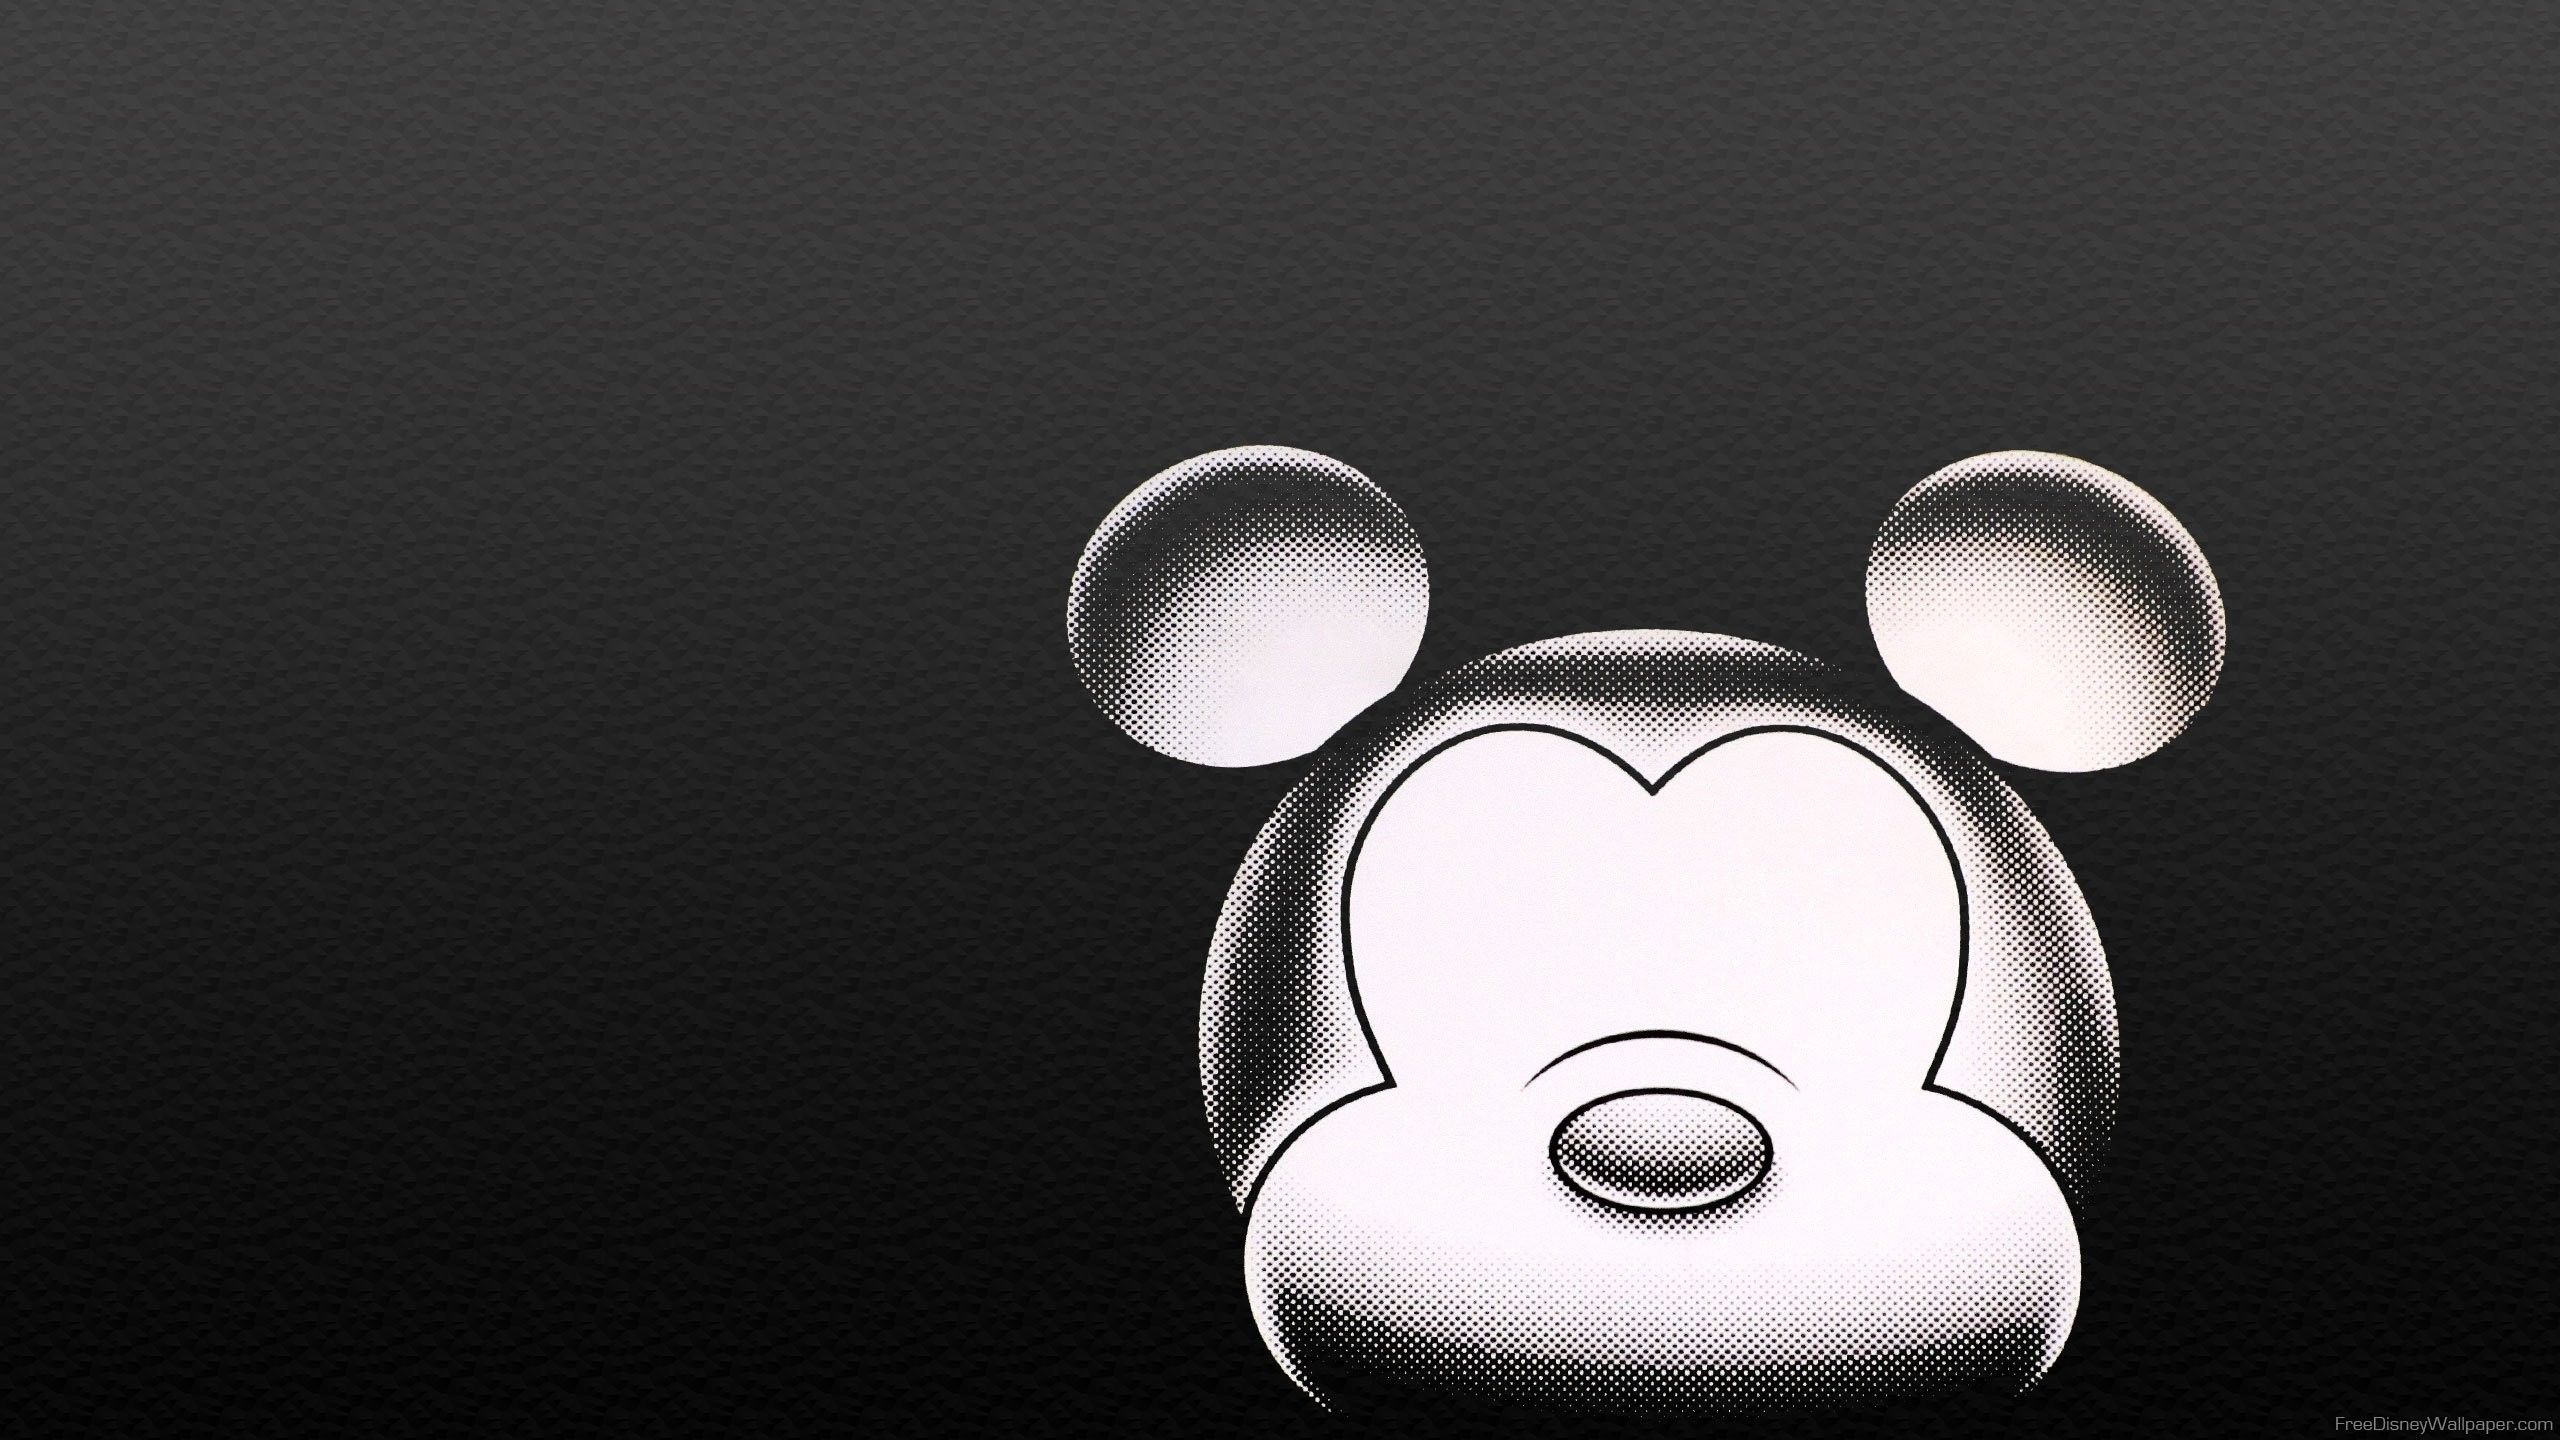 Mickey Mouse Wallpaper Desktop (66+ images)